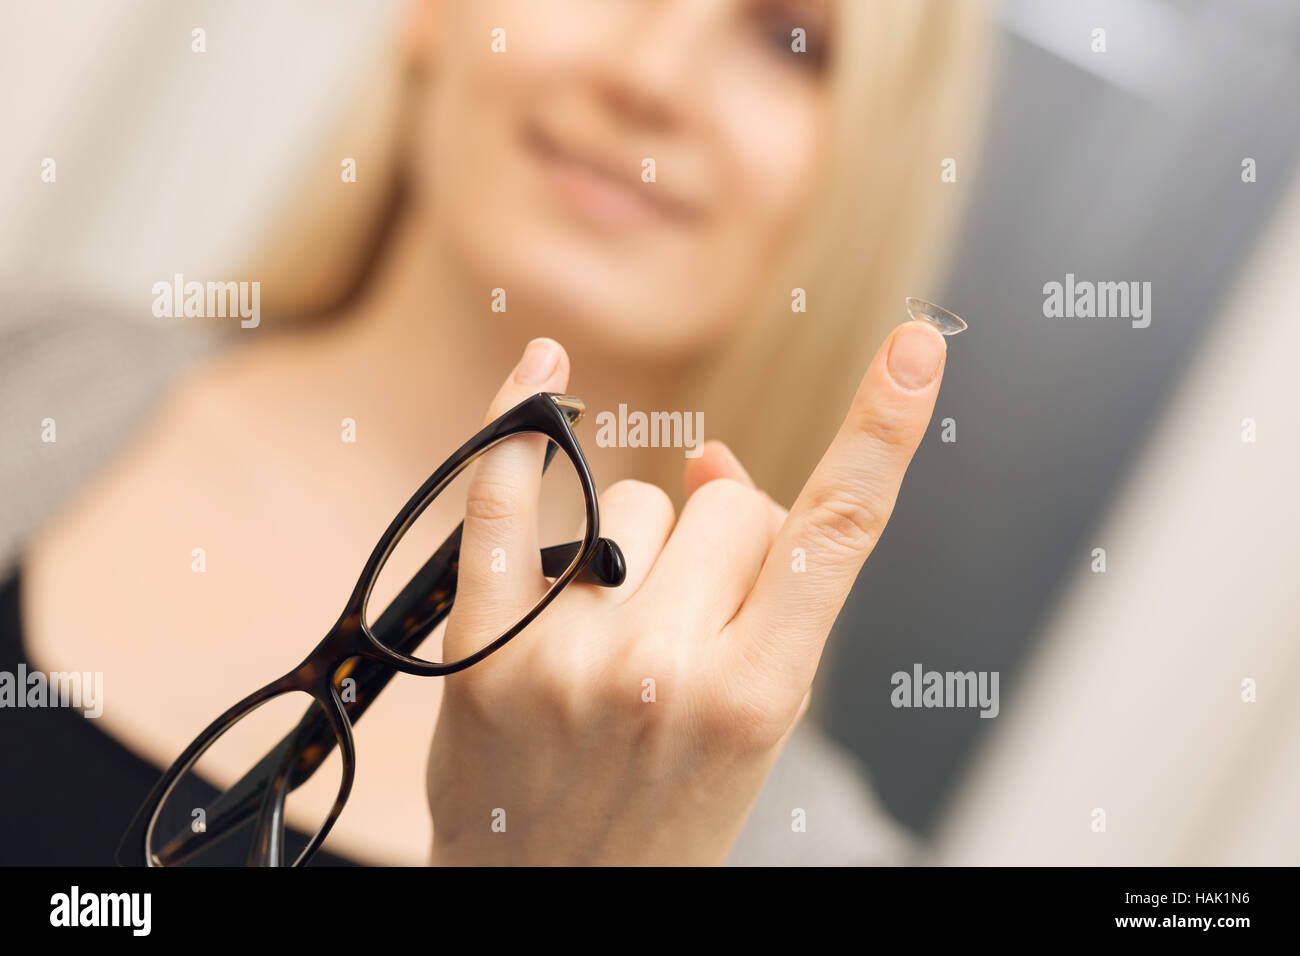 eye care - choice between glasses and contacts Stock Photo